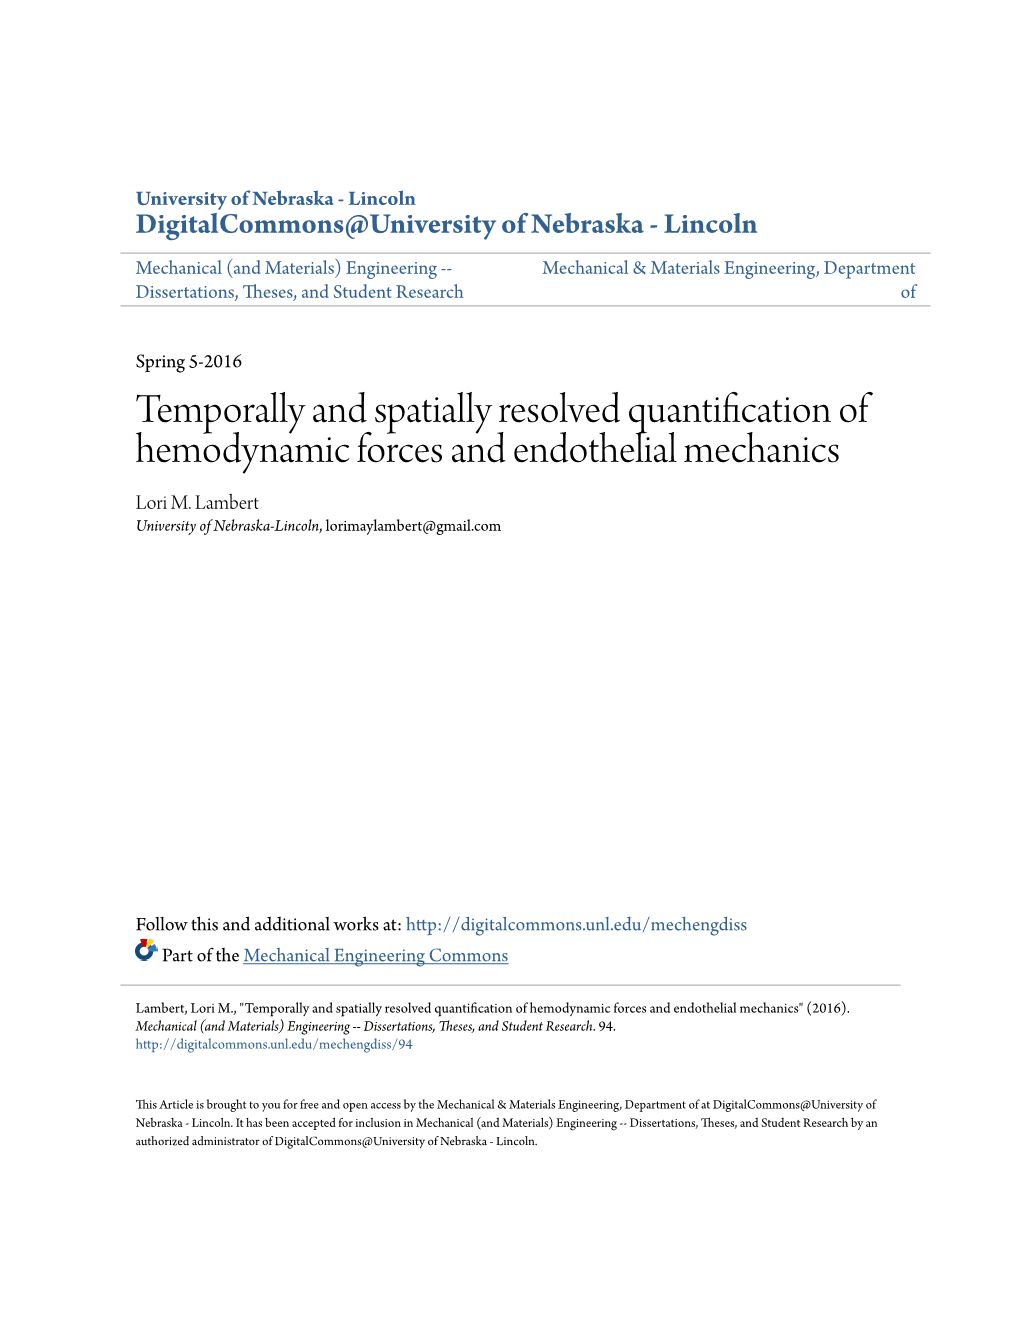 Temporally and Spatially Resolved Quantification of Hemodynamic Forces and Endothelial Mechanics Lori M